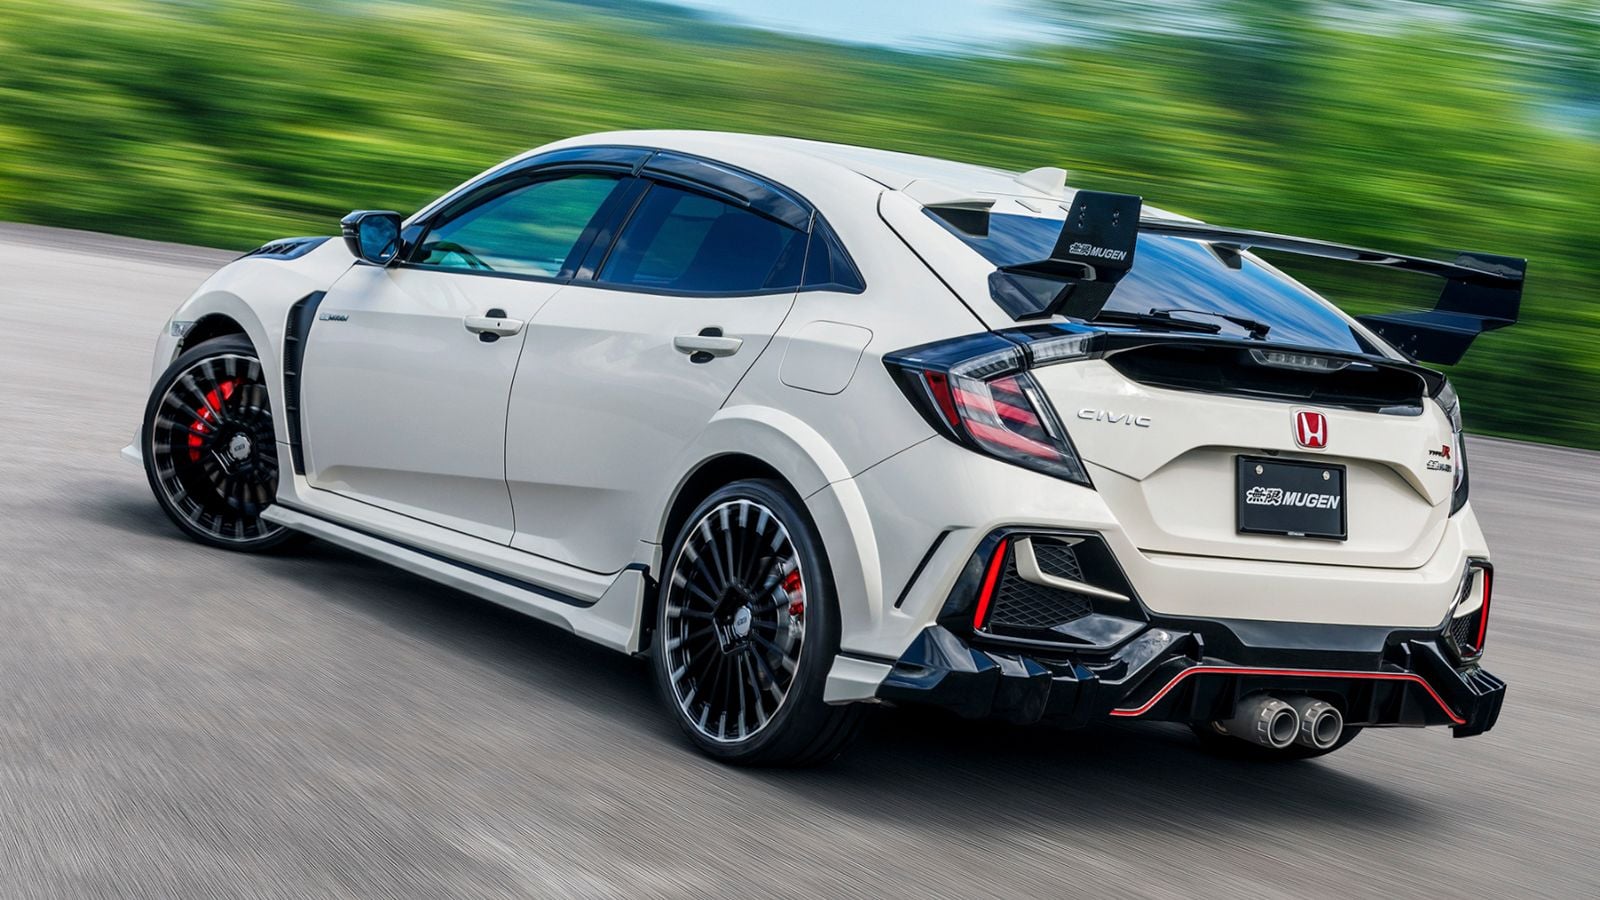 Mugen Brings Wild Styling Features to FK8 Honda Civic Type R Hondatech